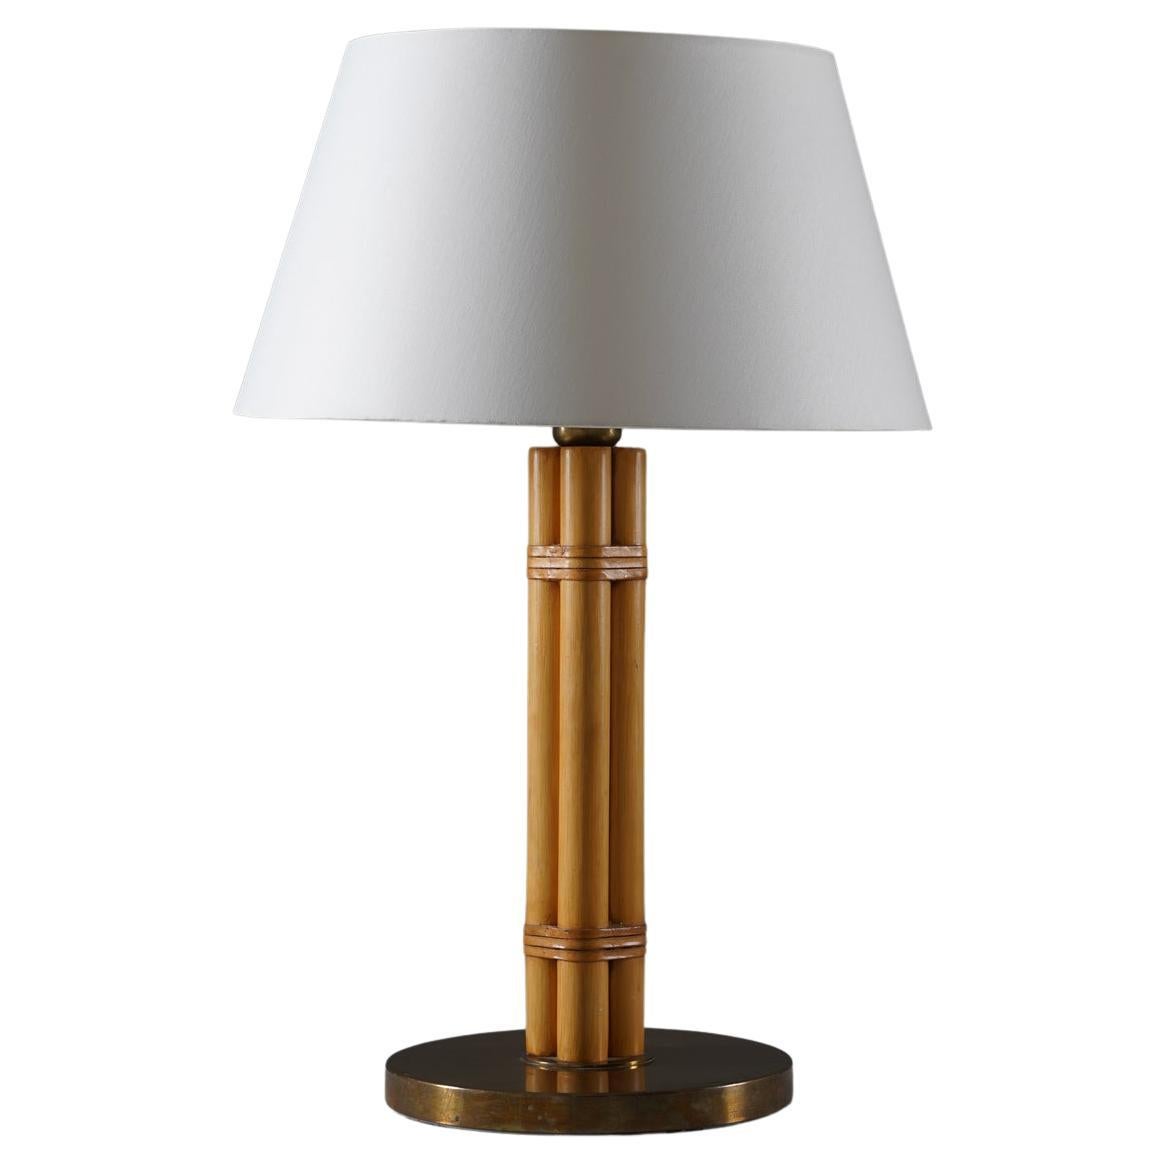 Scandinavian Midcentury Table Lamp in Brass and Bamboo by Bergboms, Sweden